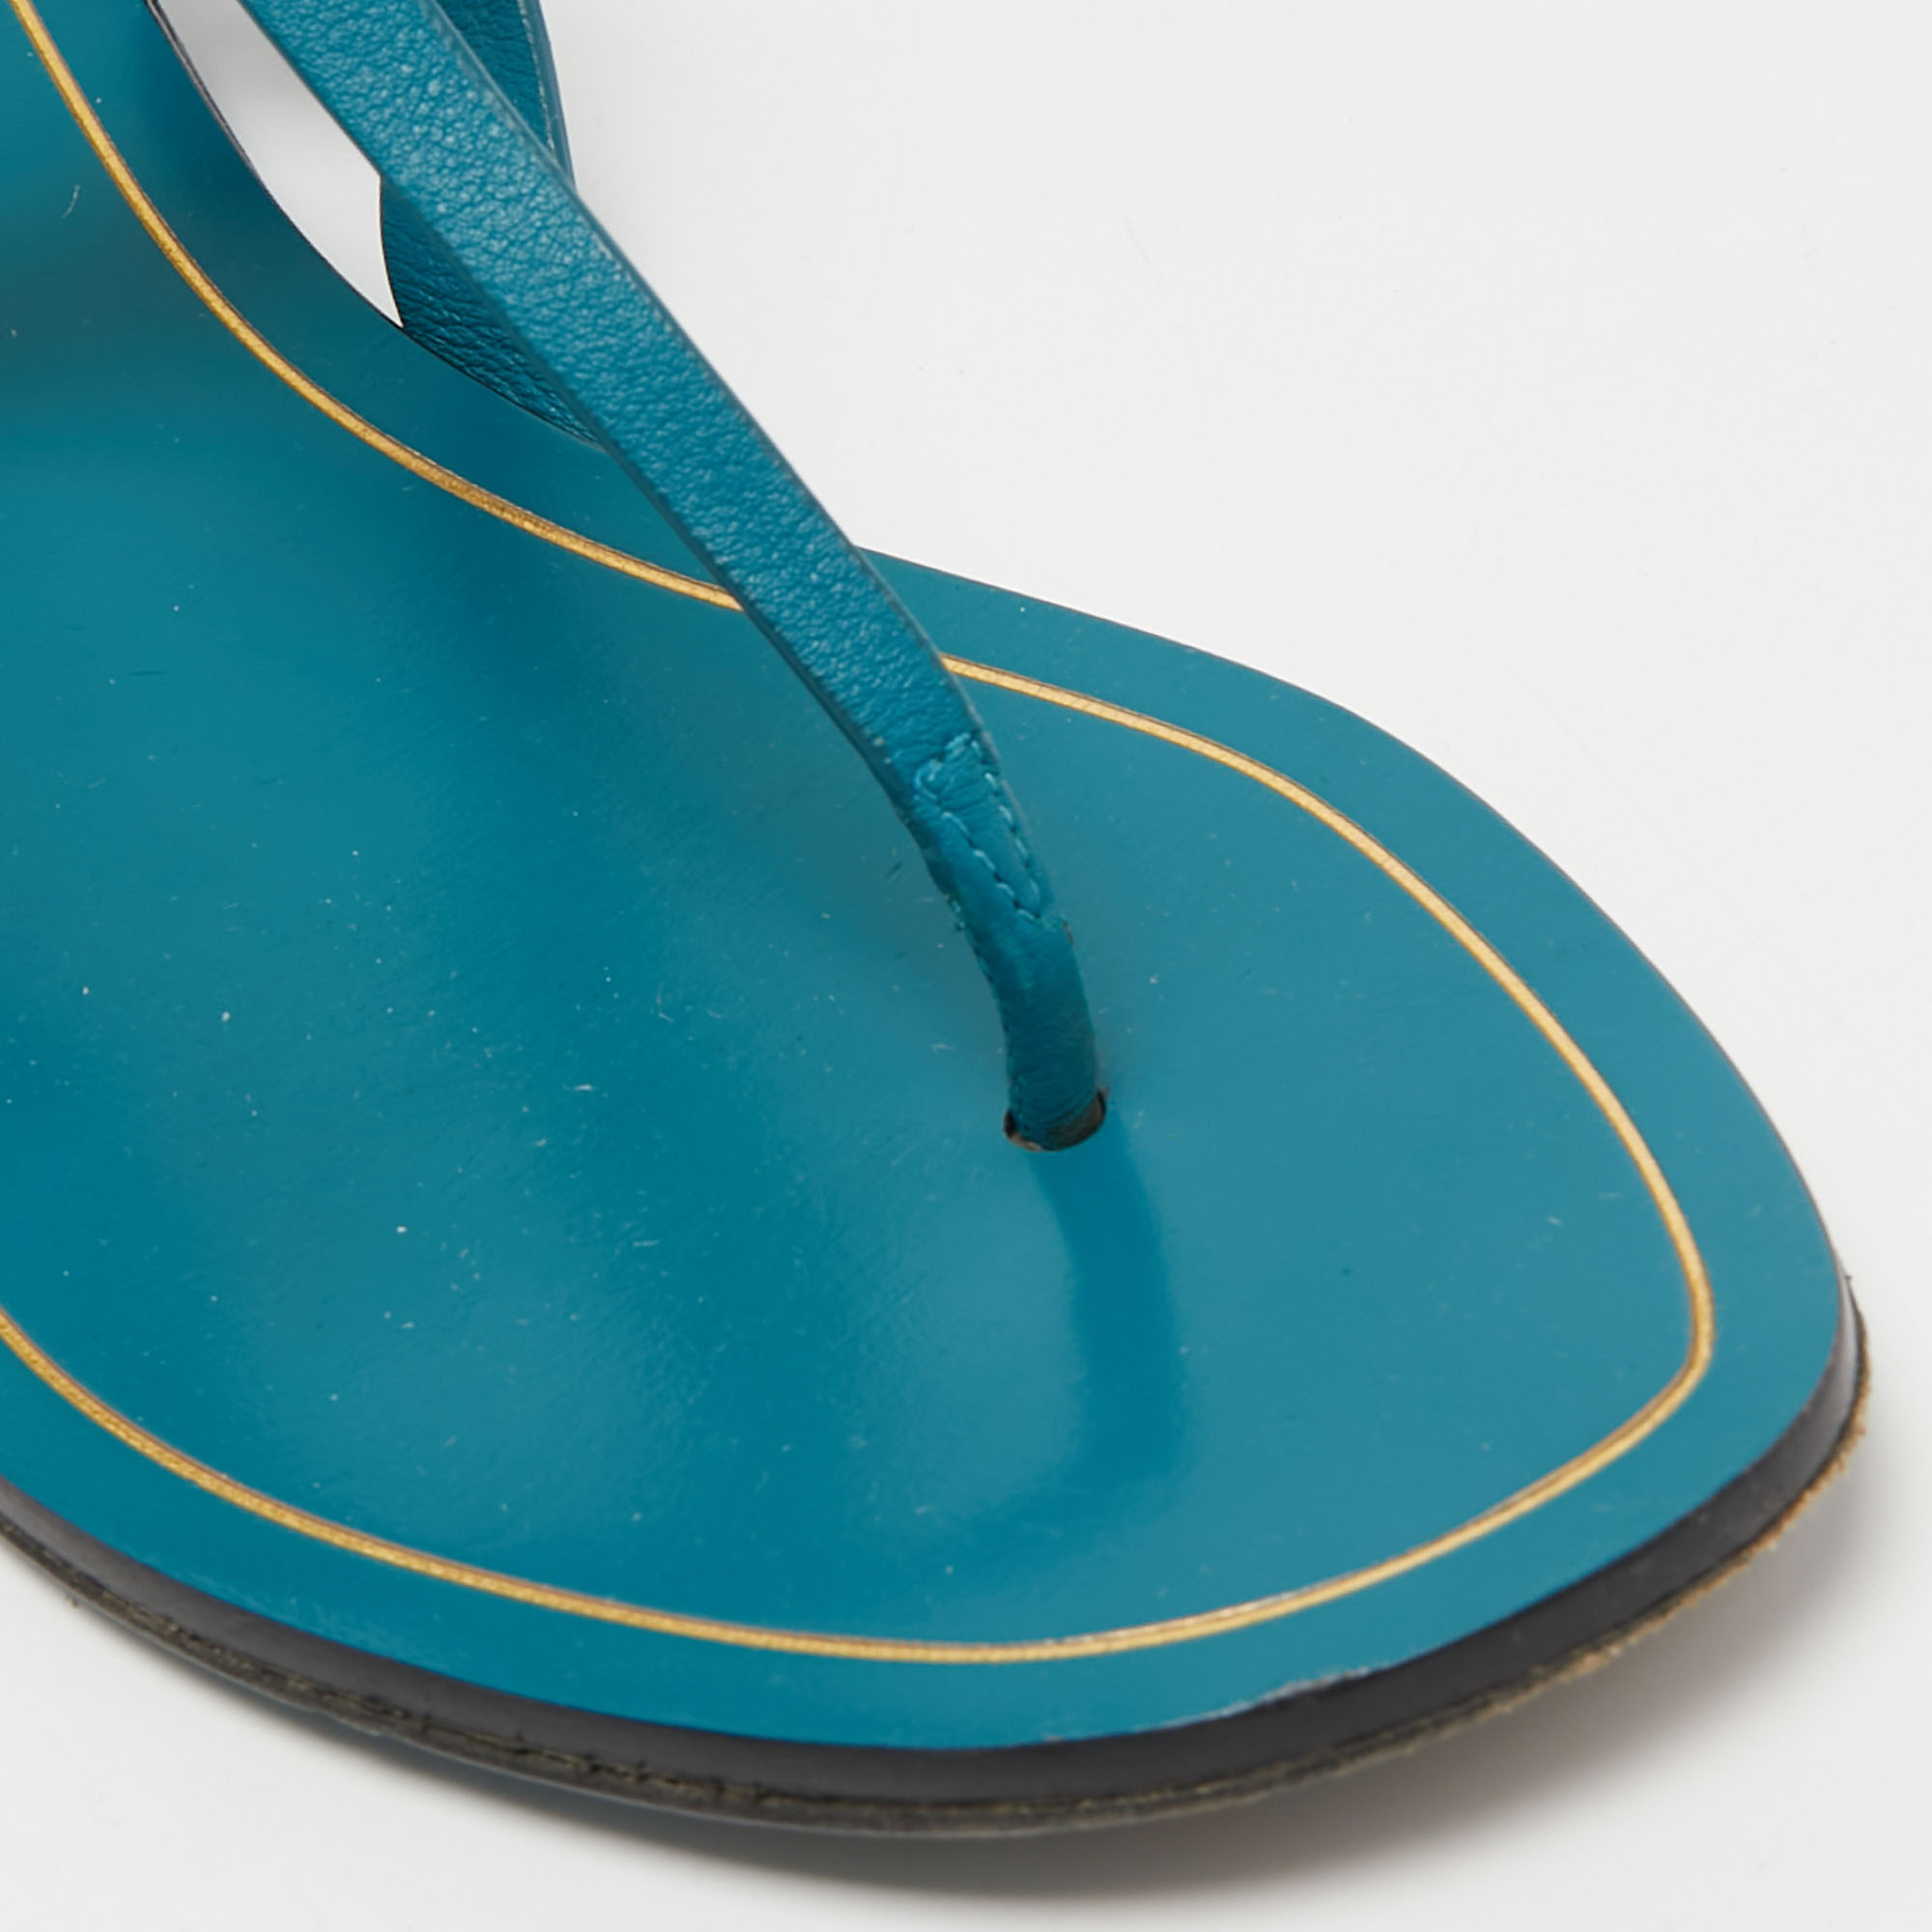 Gucci Blue LeatherThong Ankle Strap Flat Sandals Size 35.5